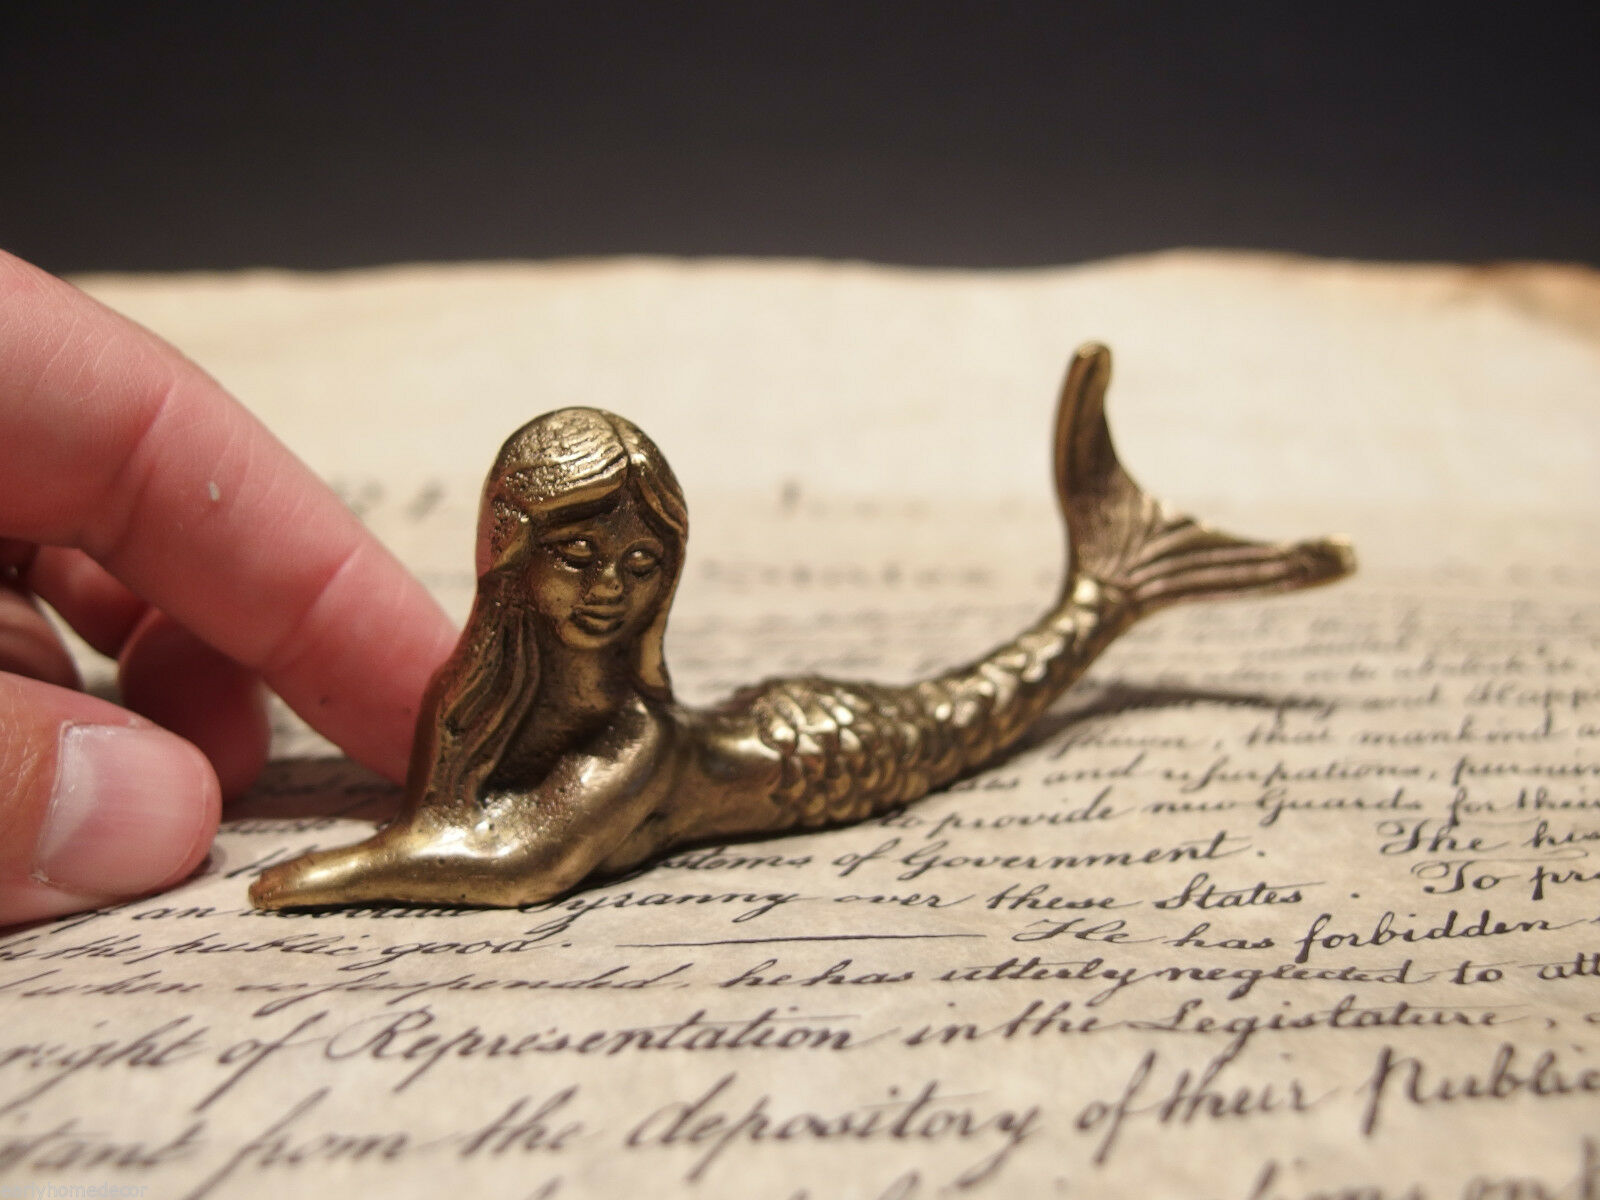 5" Vintage Antique Style Brass Nautical Mermaid Paperweight Desk Figure - Early Home Decor